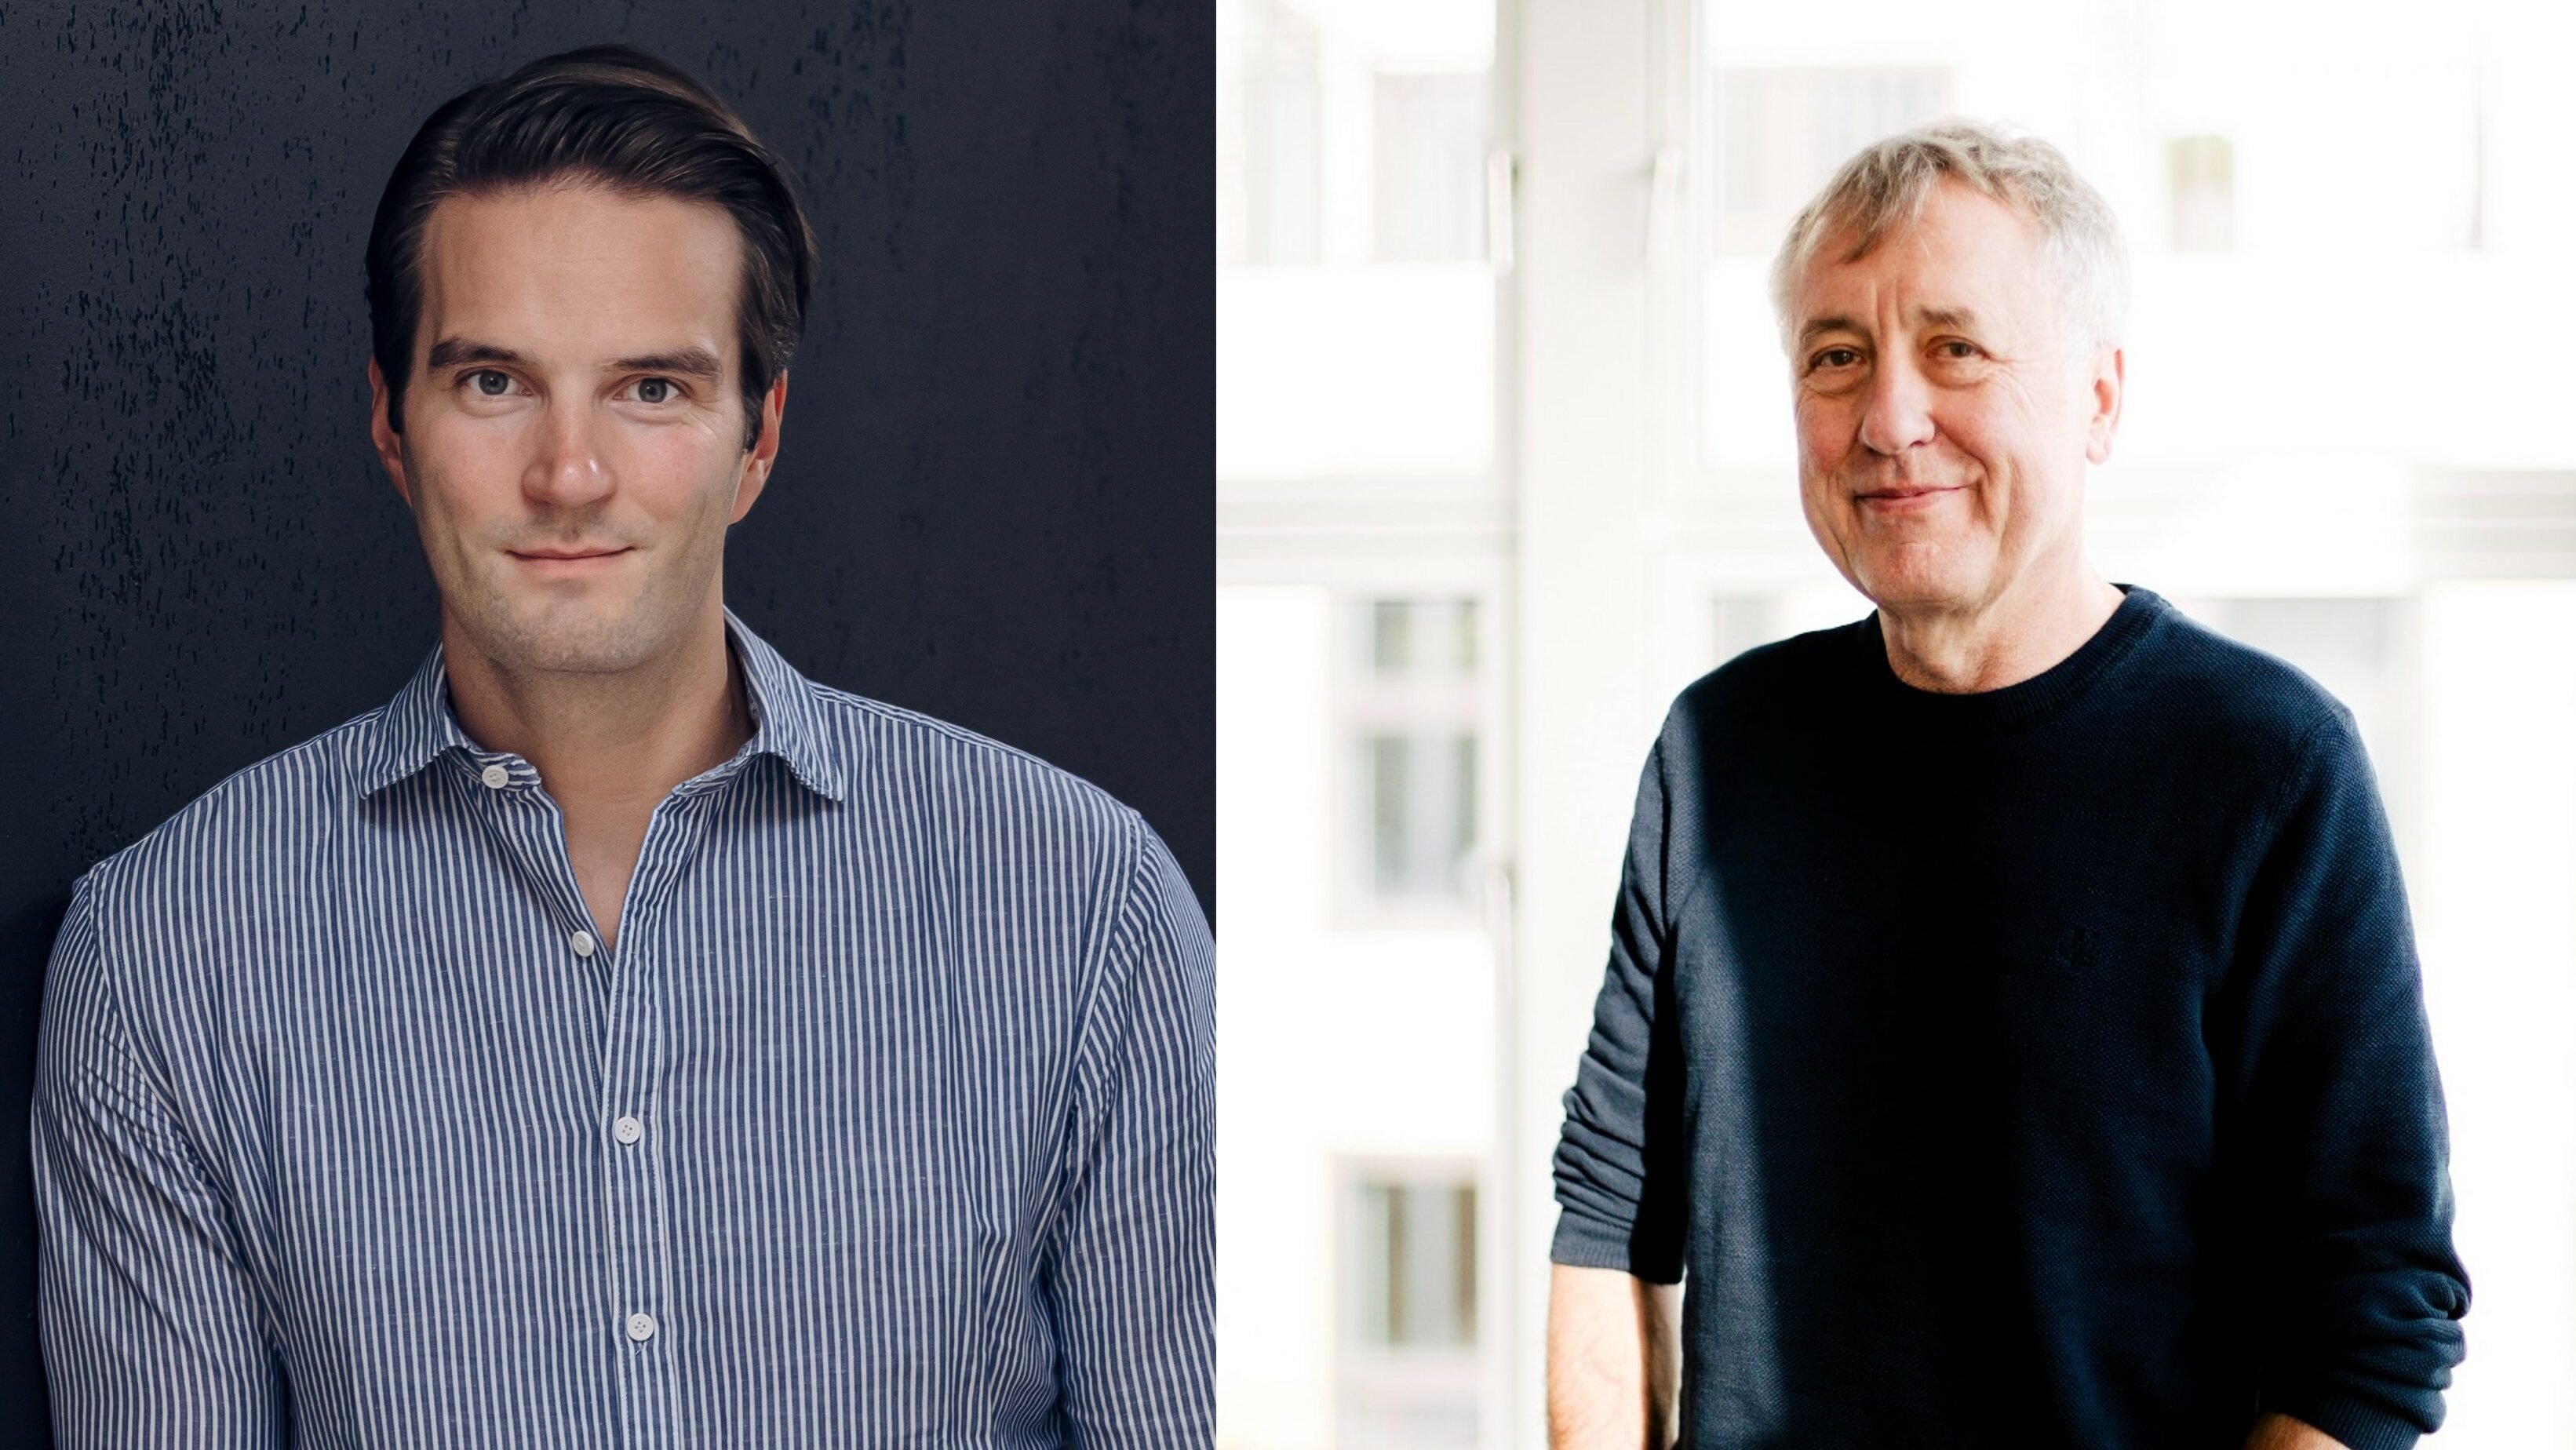 Hartwig Masuch to step down as BMG CEO, succeeded by Thomas Coesfeld – Music Business Worldwide